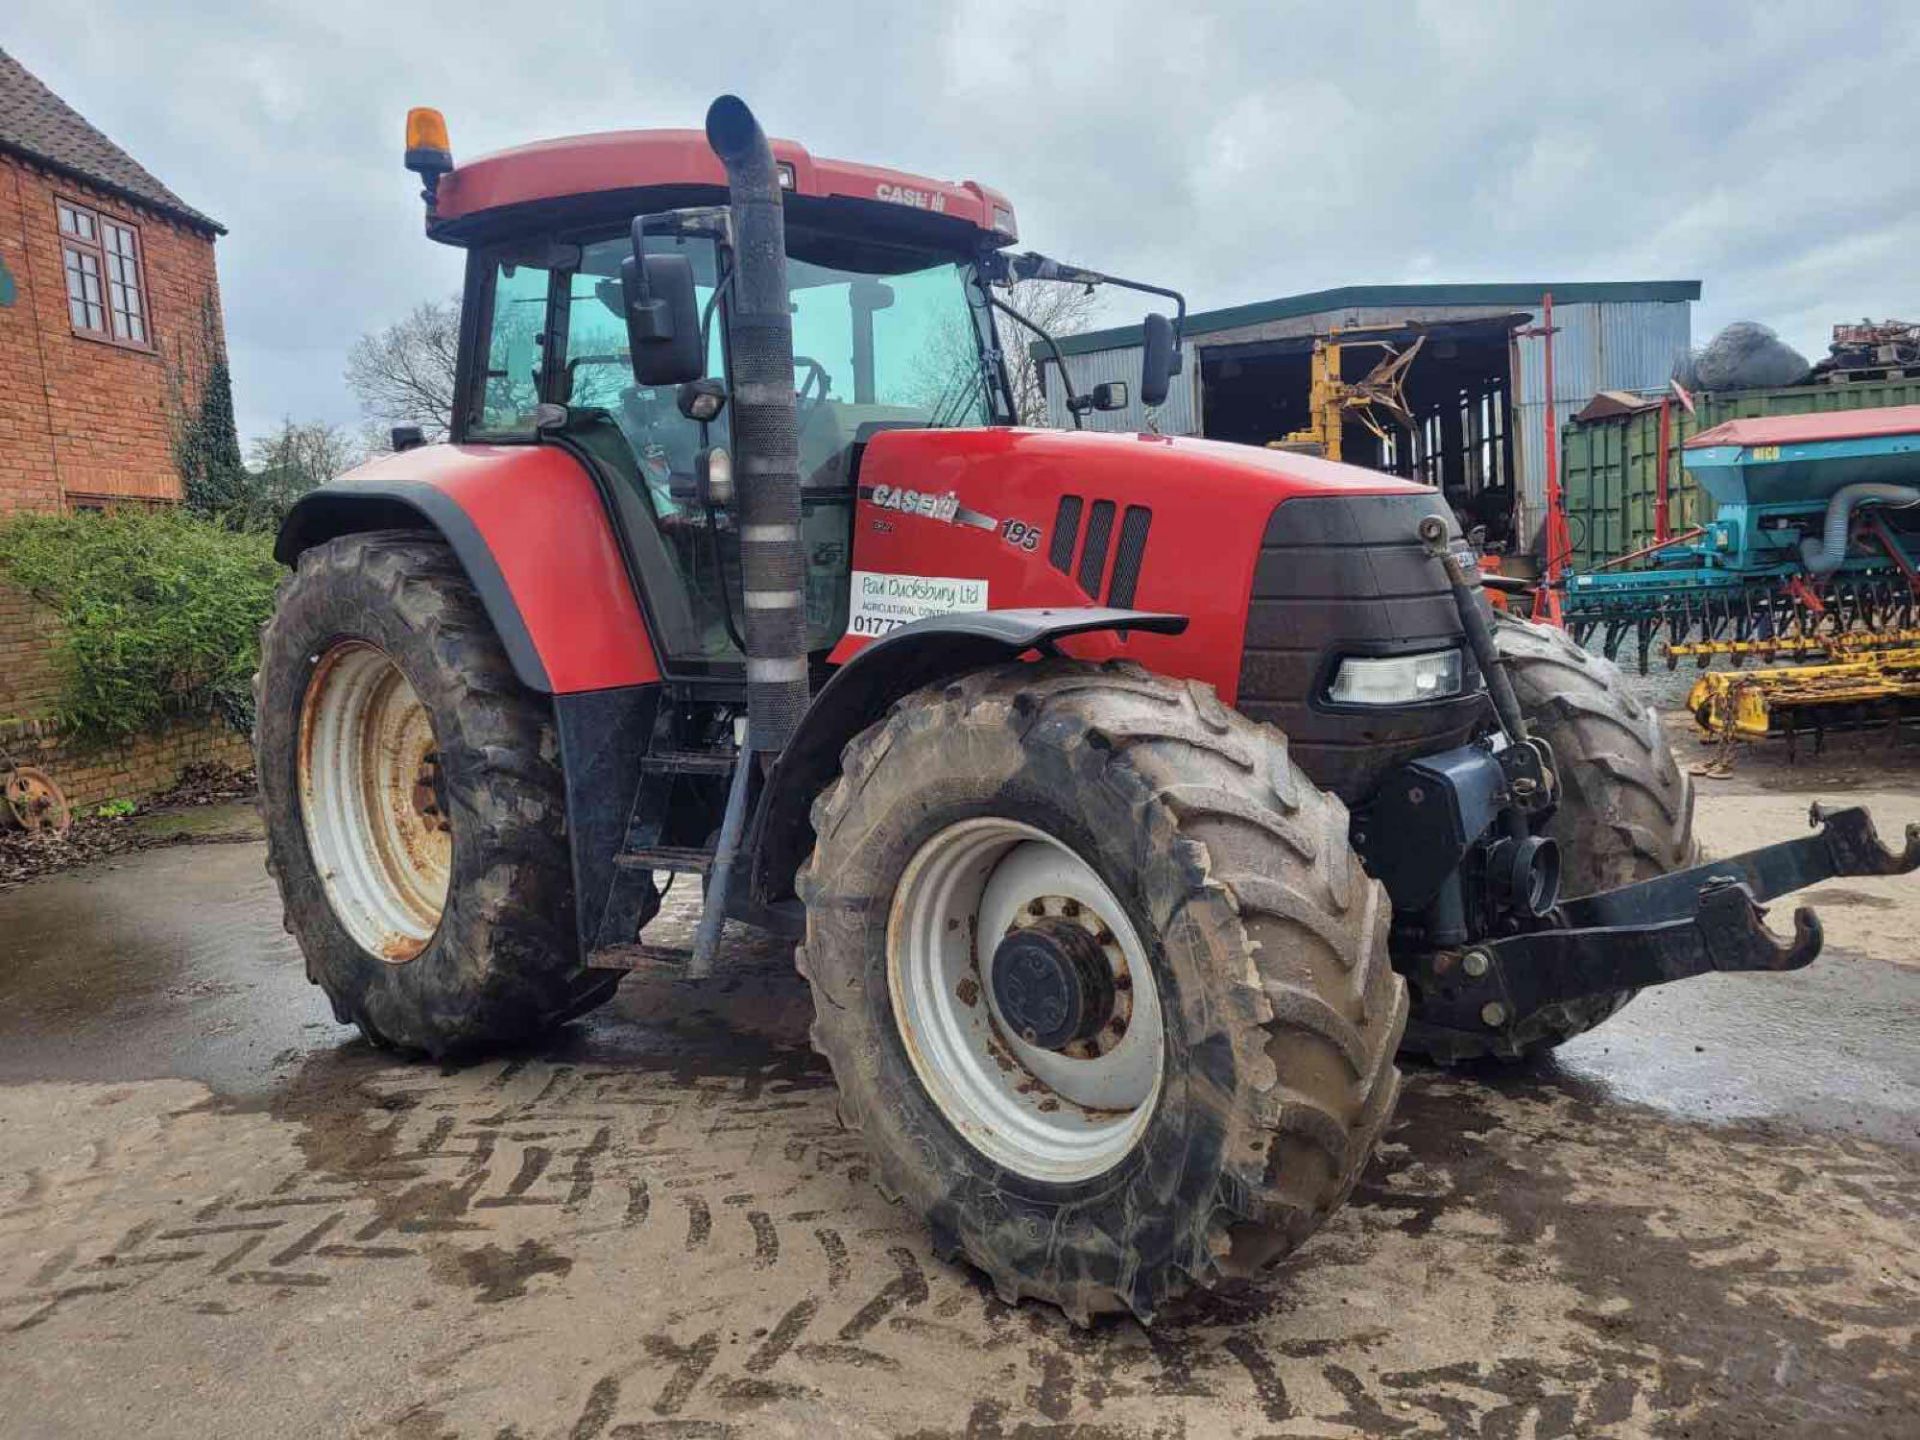 2008 Case 195 CVX 50 kph Vario 4wd tractor with 4 electric spools, air brakes and front linkage and